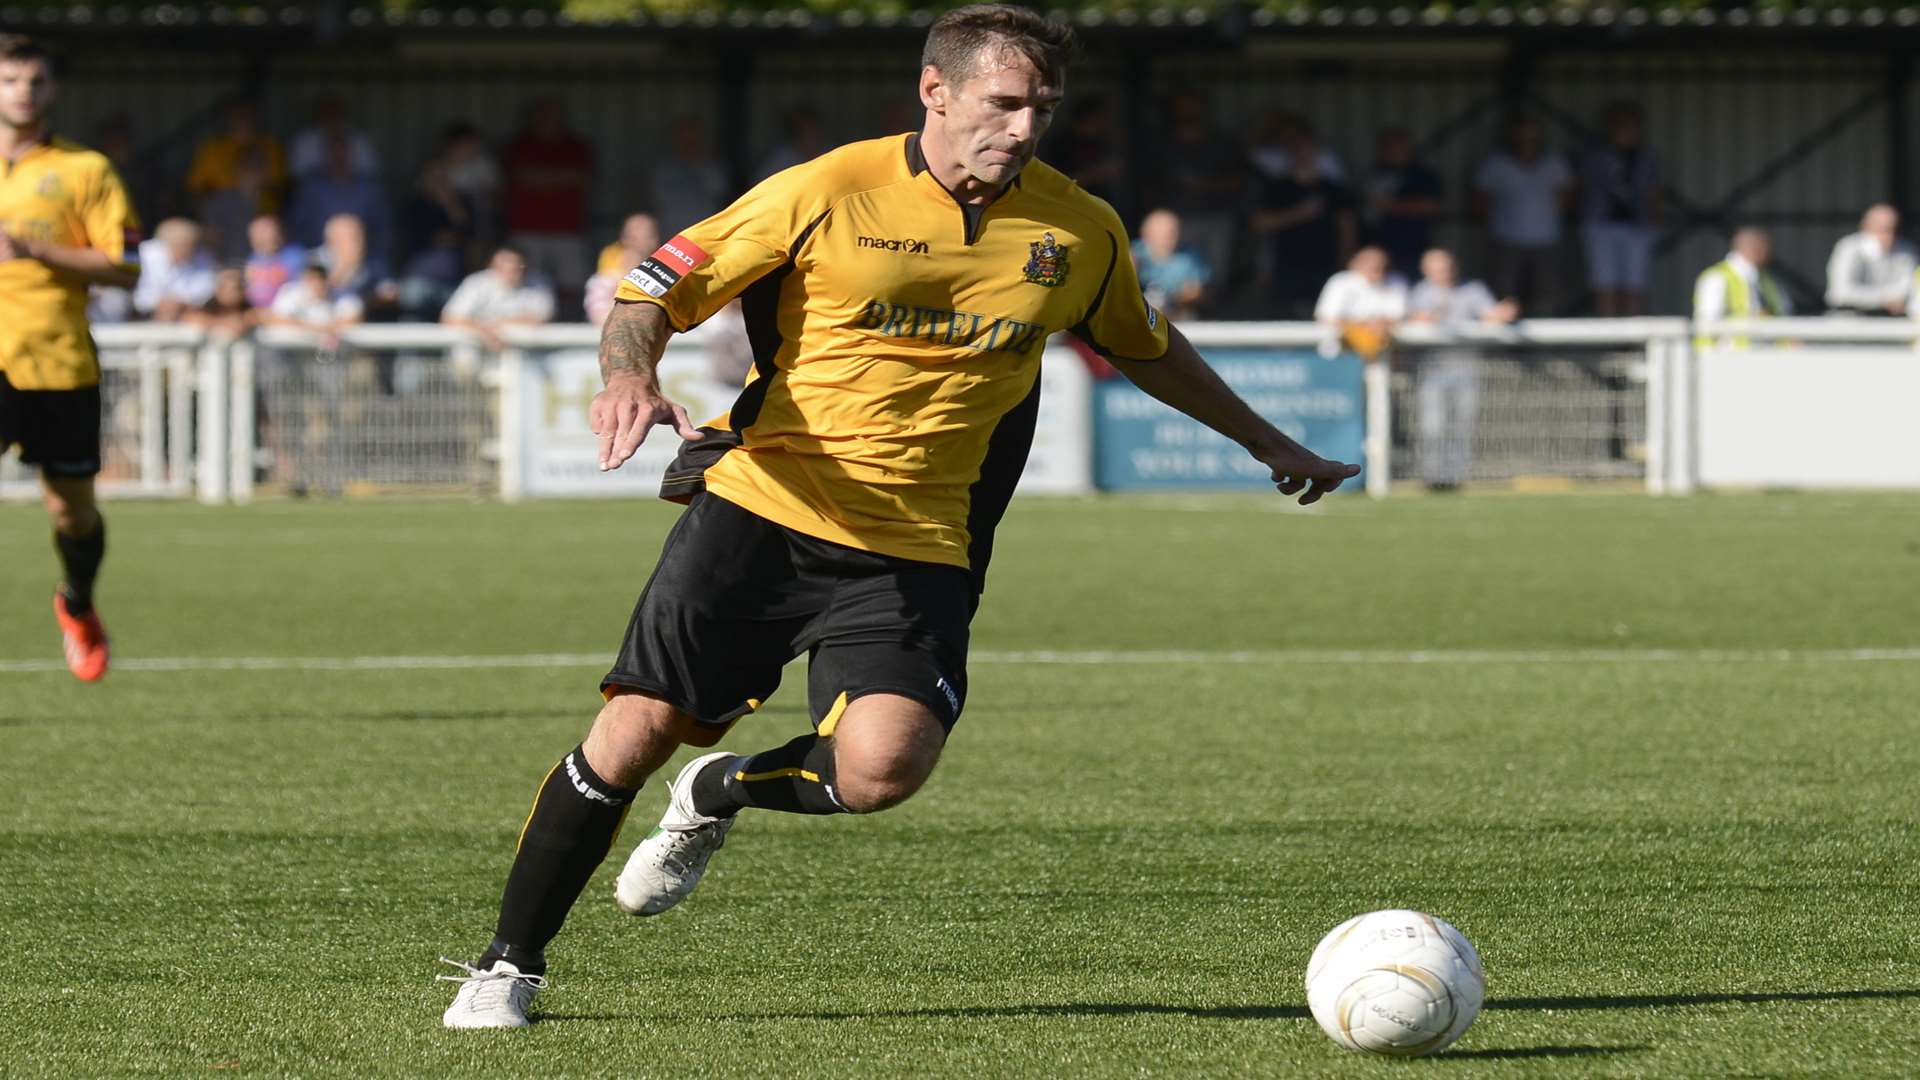 Paul Booth - playing for Maidstone in August, 2013